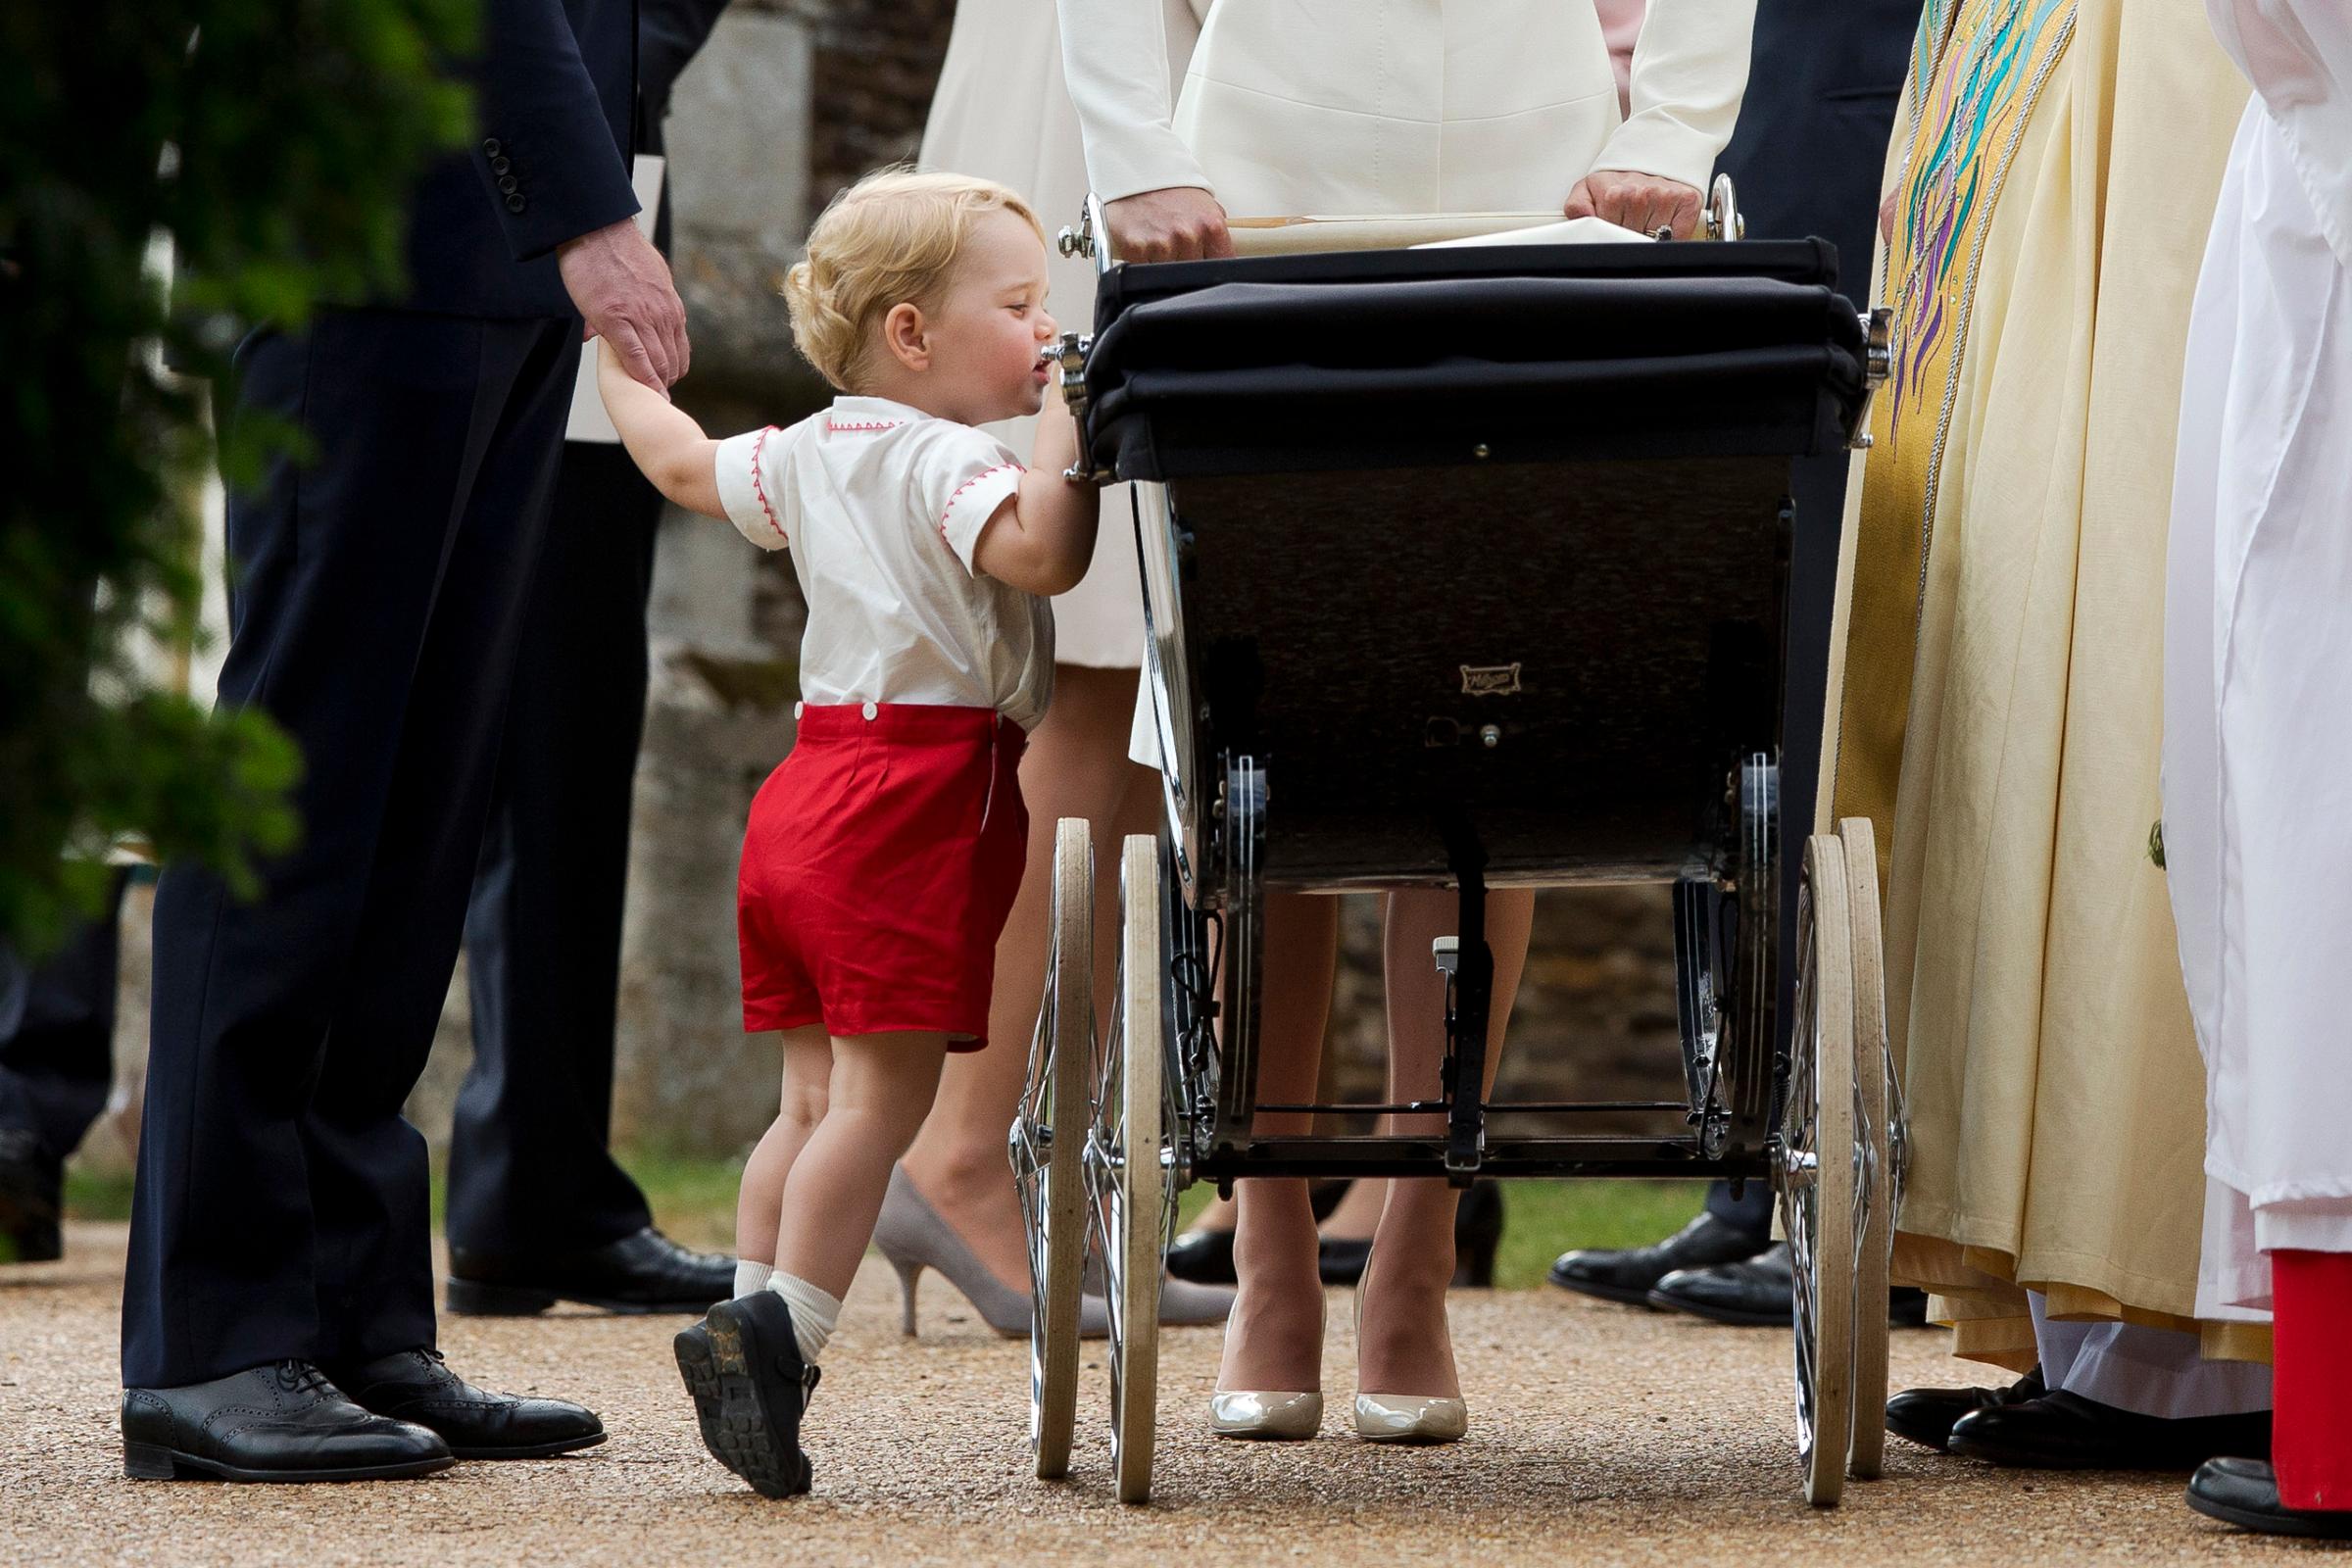 Catherine, Duchess of Cambridge and Prince William, Duke of Cambridge stand as Prince George of Cambridge looks into Princess Charlotte of Cambridge's pram as they leave the Church of St Mary Magdalene on the Sandringham Estate after the Christening of Princess Charlotte of Cambridge in King's Lynn, England on July 5, 2015.